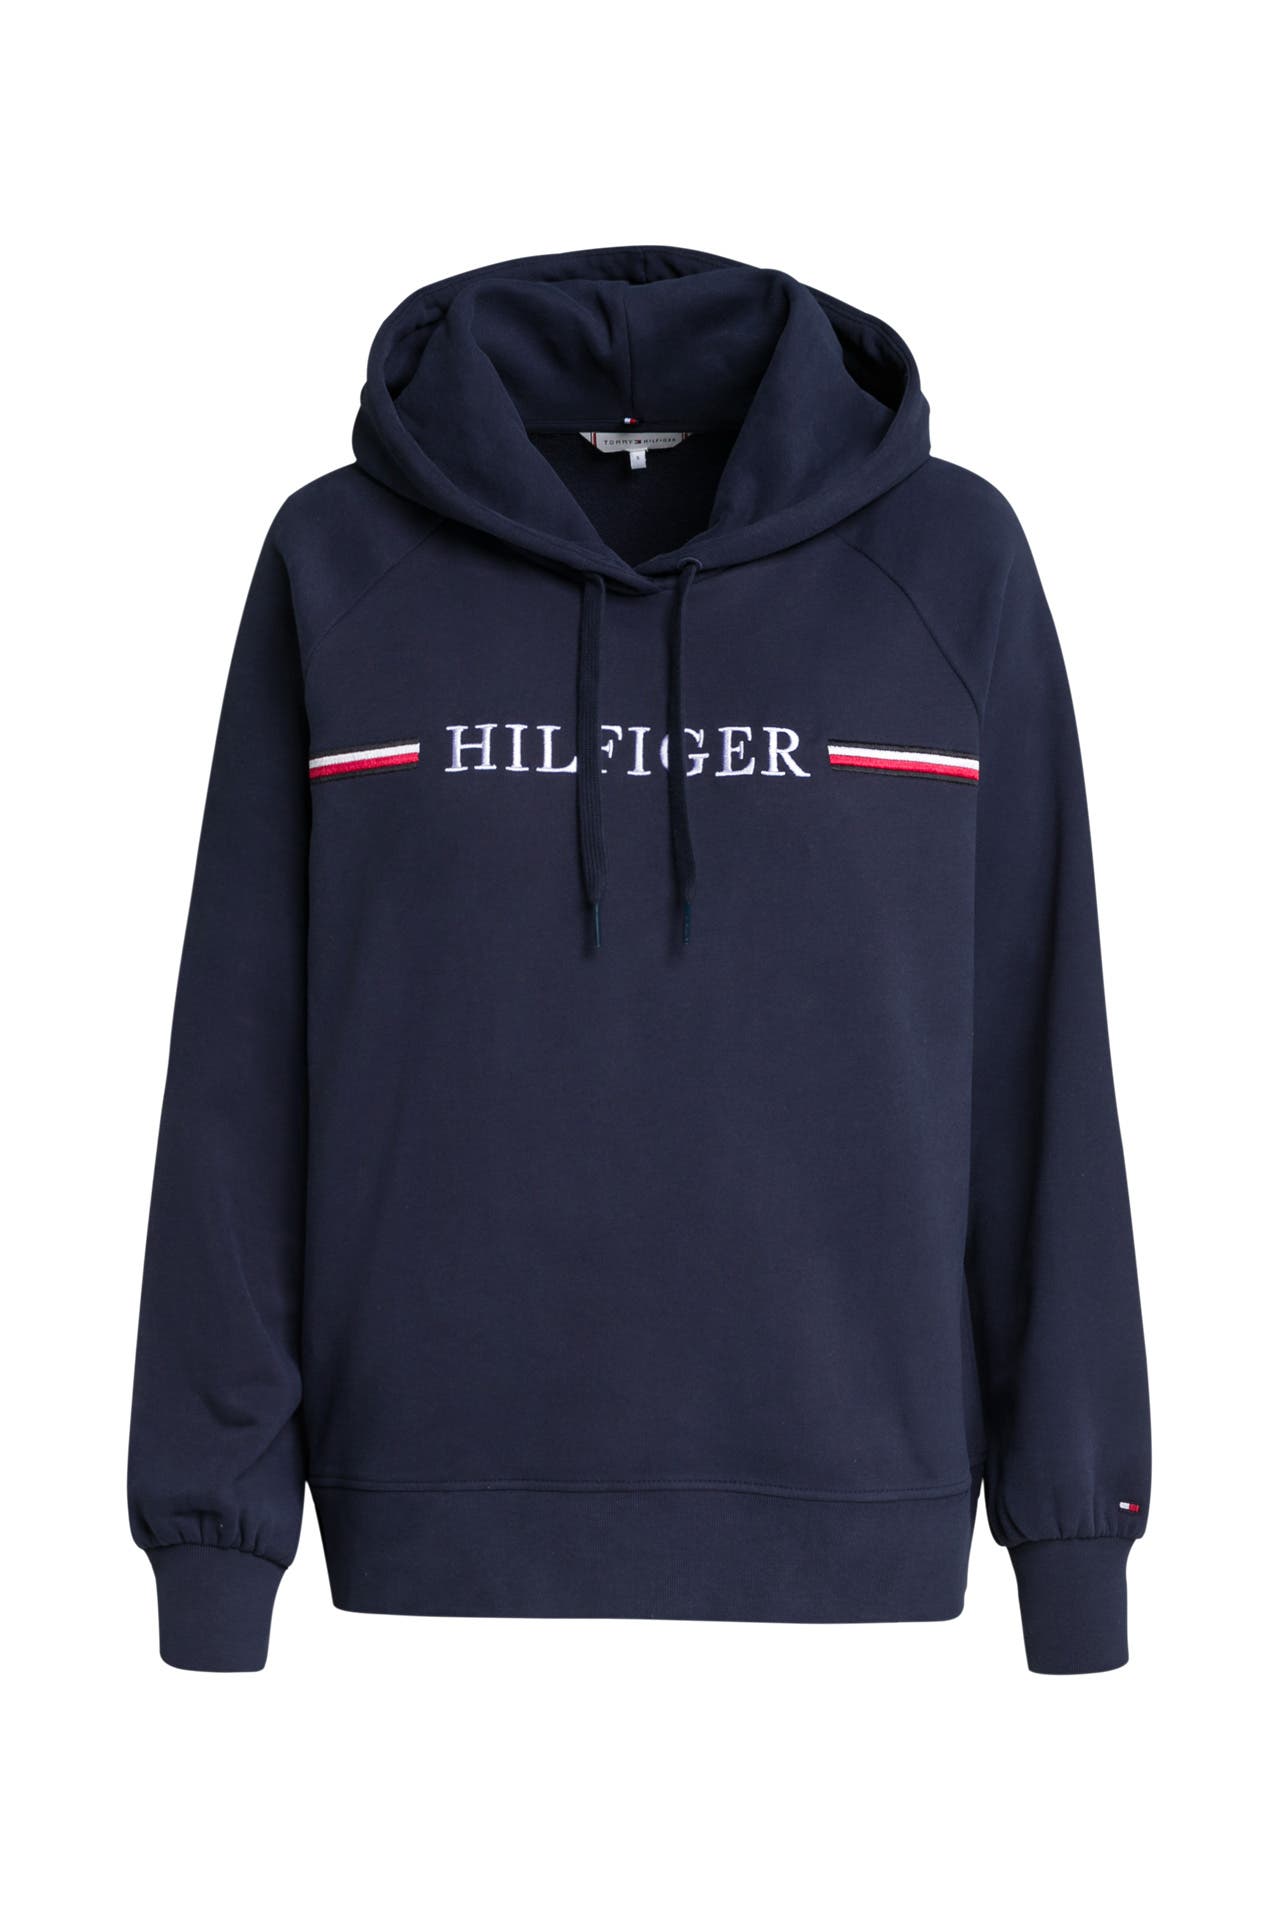 Tommy Hilfiger OUTLET in Germany » Sale up to 70% off OUTLETCITY METZINGEN